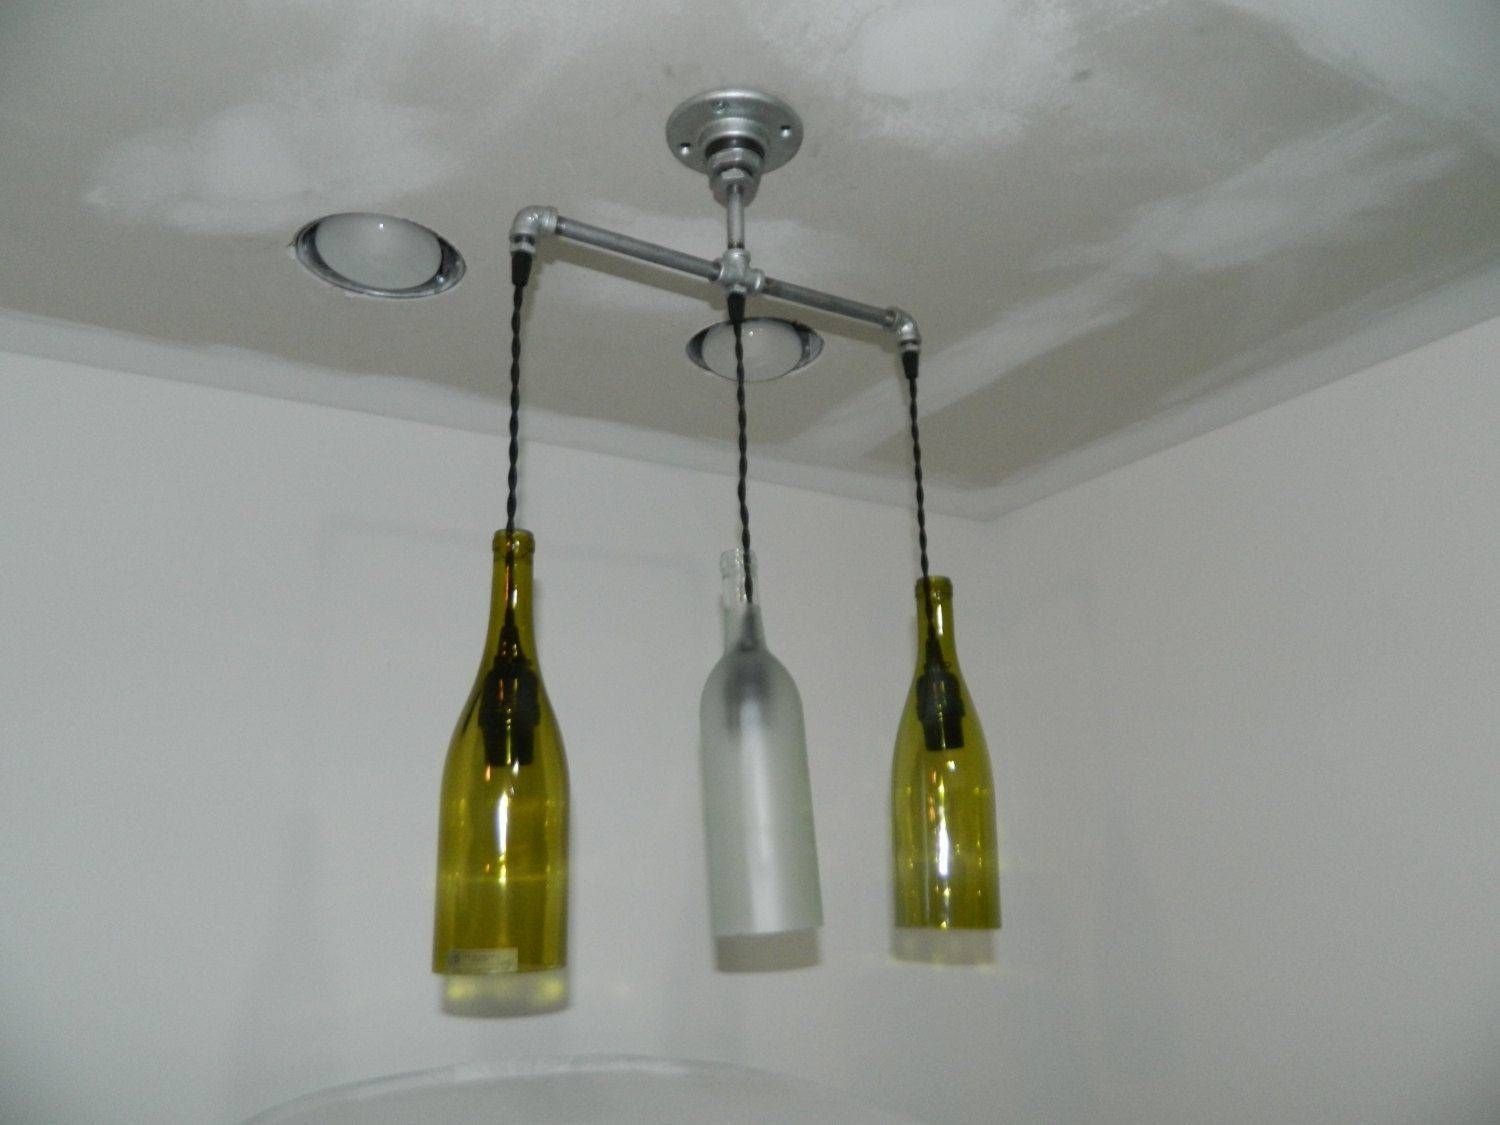 Awesome Wine Bottle Pendant Light Home Interior Design Bottle And Throughout Wine Bottle Ceiling Lights (View 15 of 15)